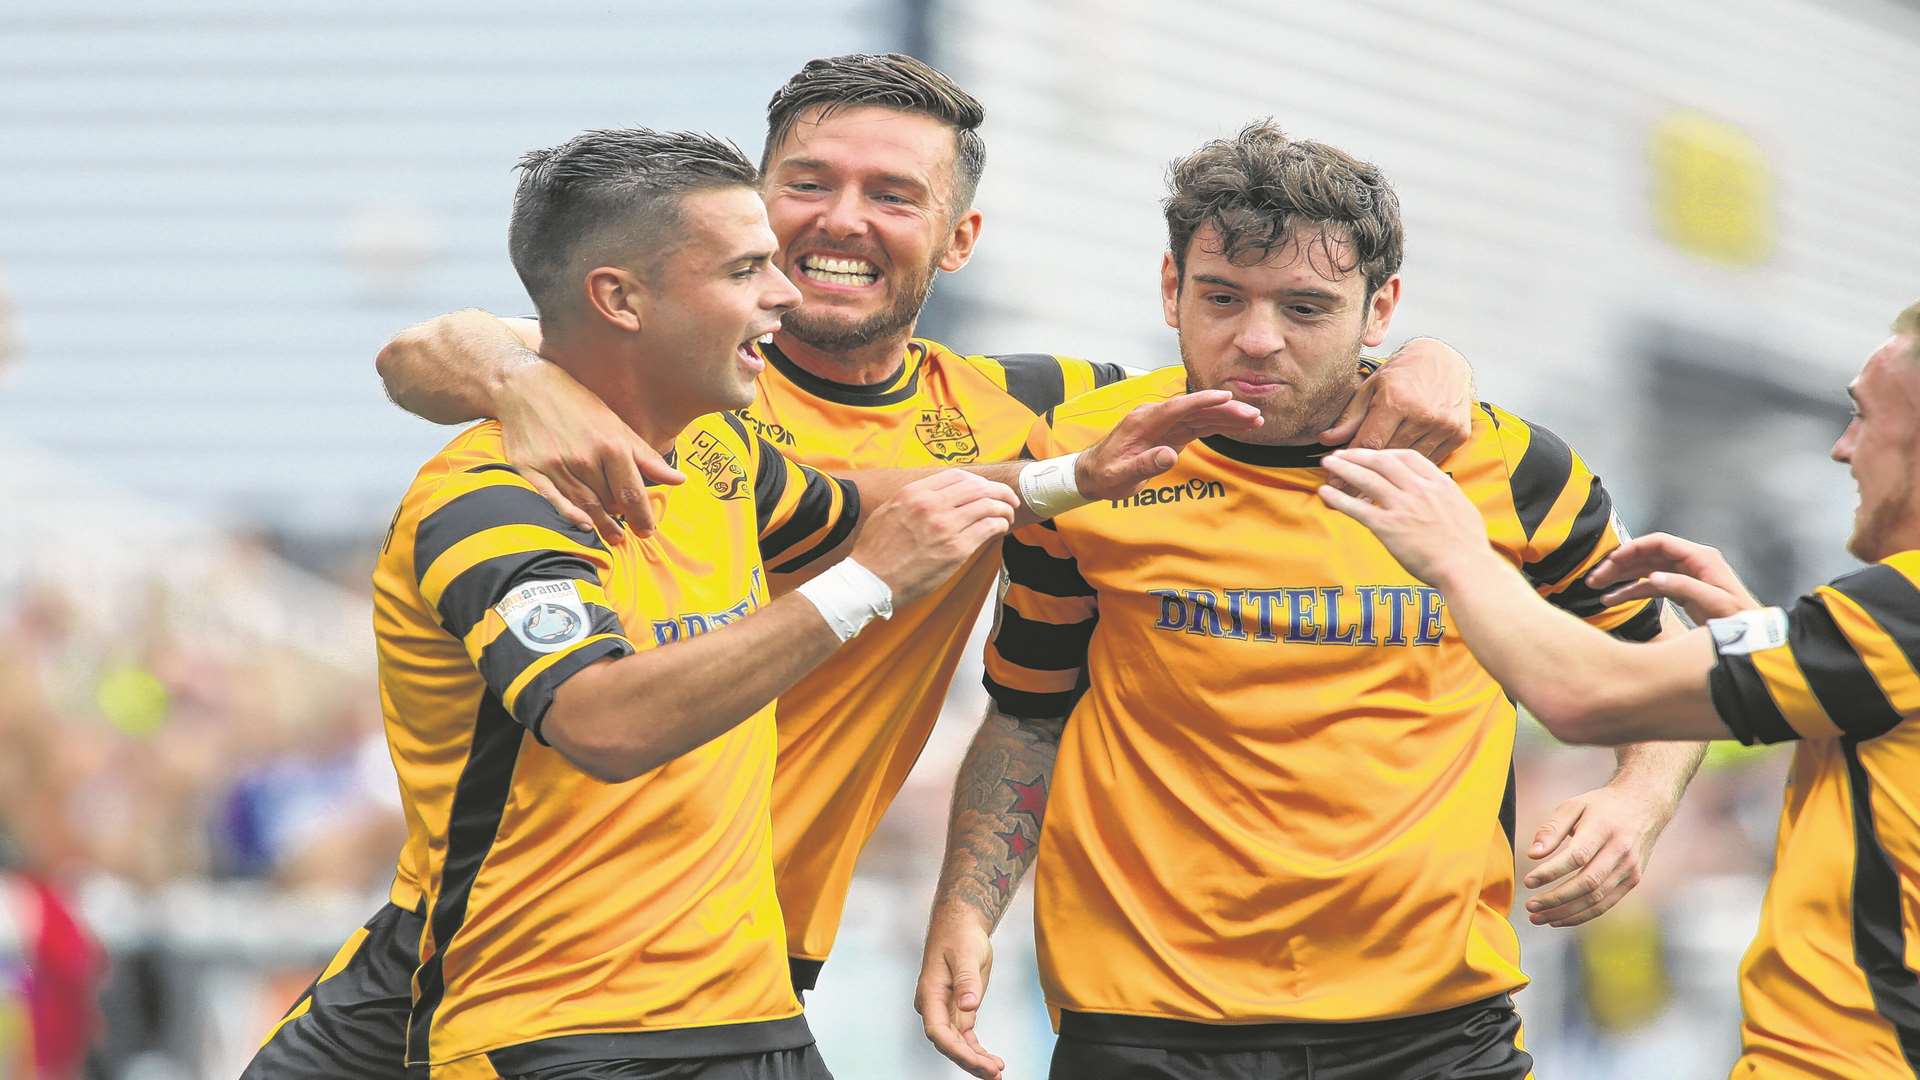 See Maidstone in FA Cup action